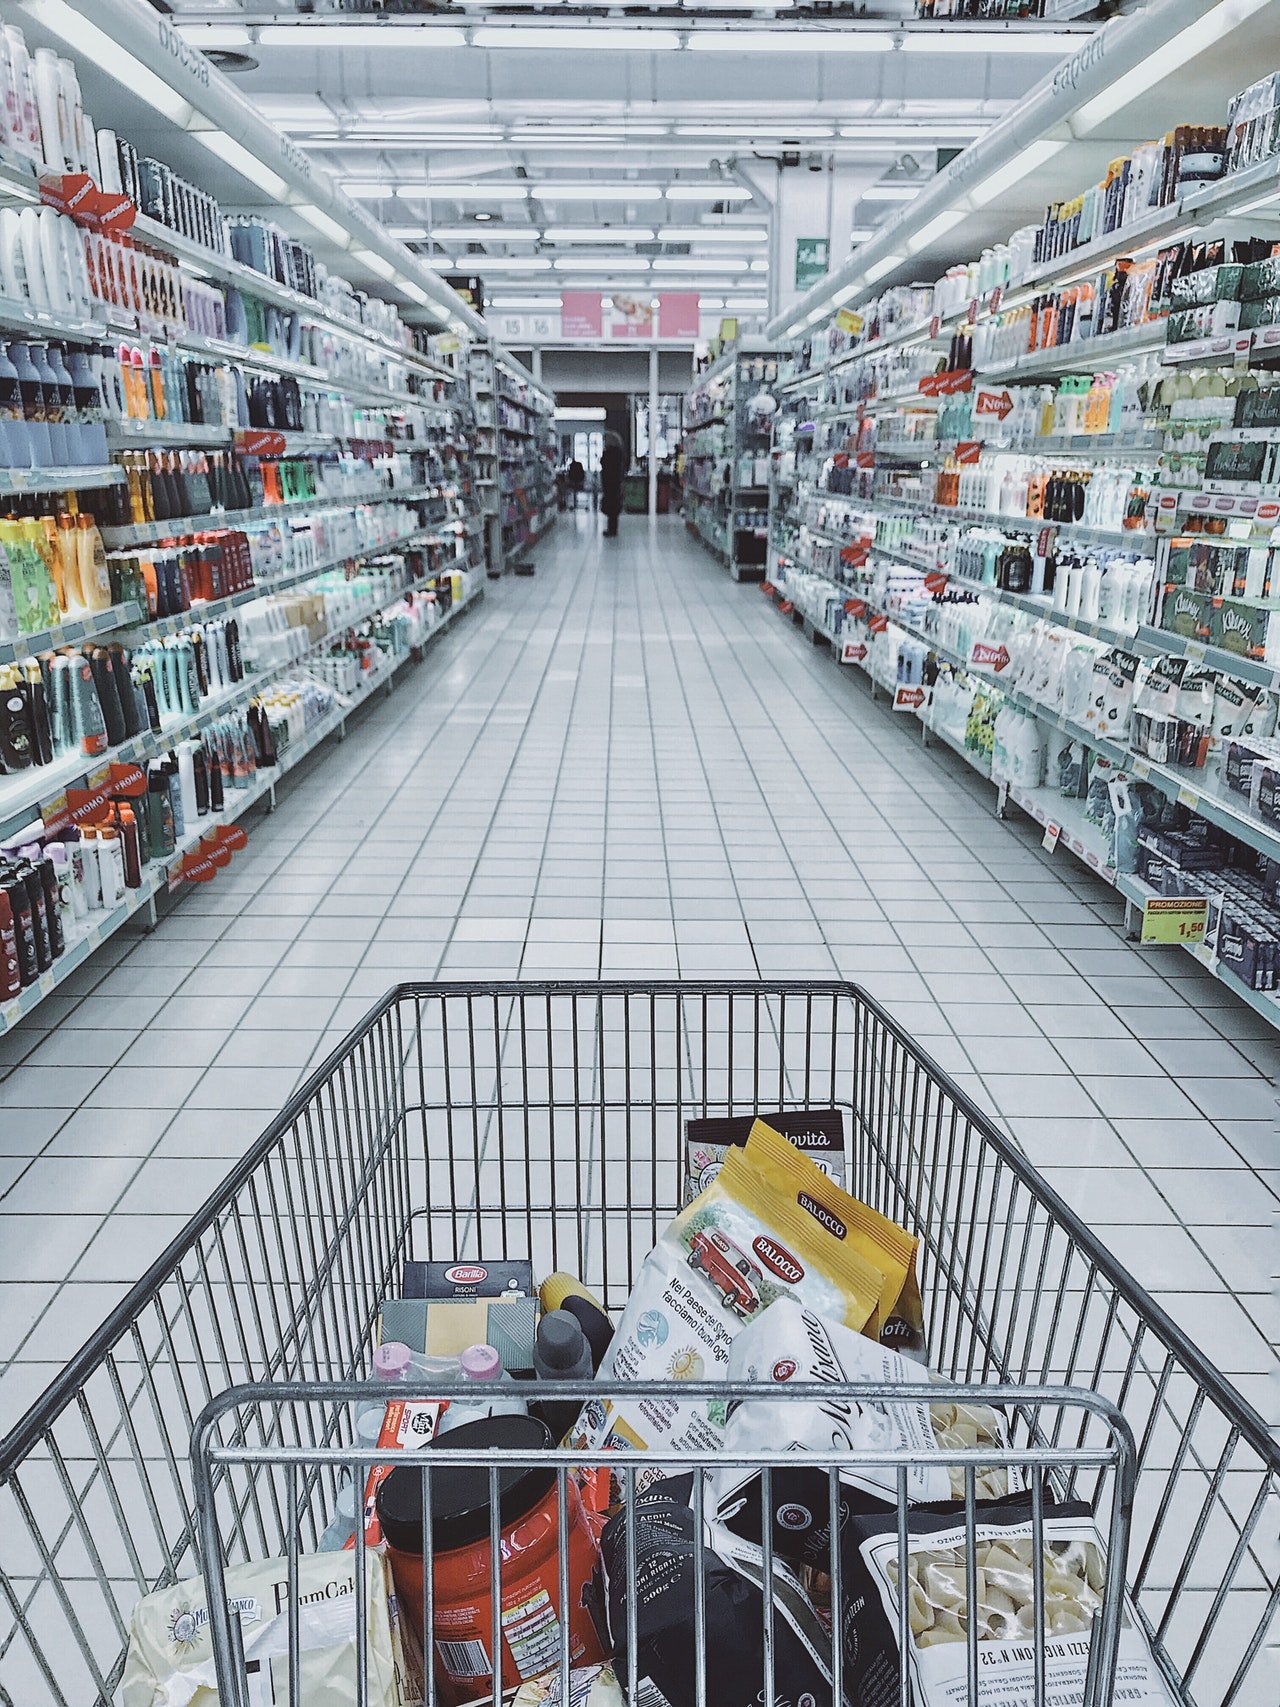 He bought tons of groceries for Elliot. | Source: Pexels